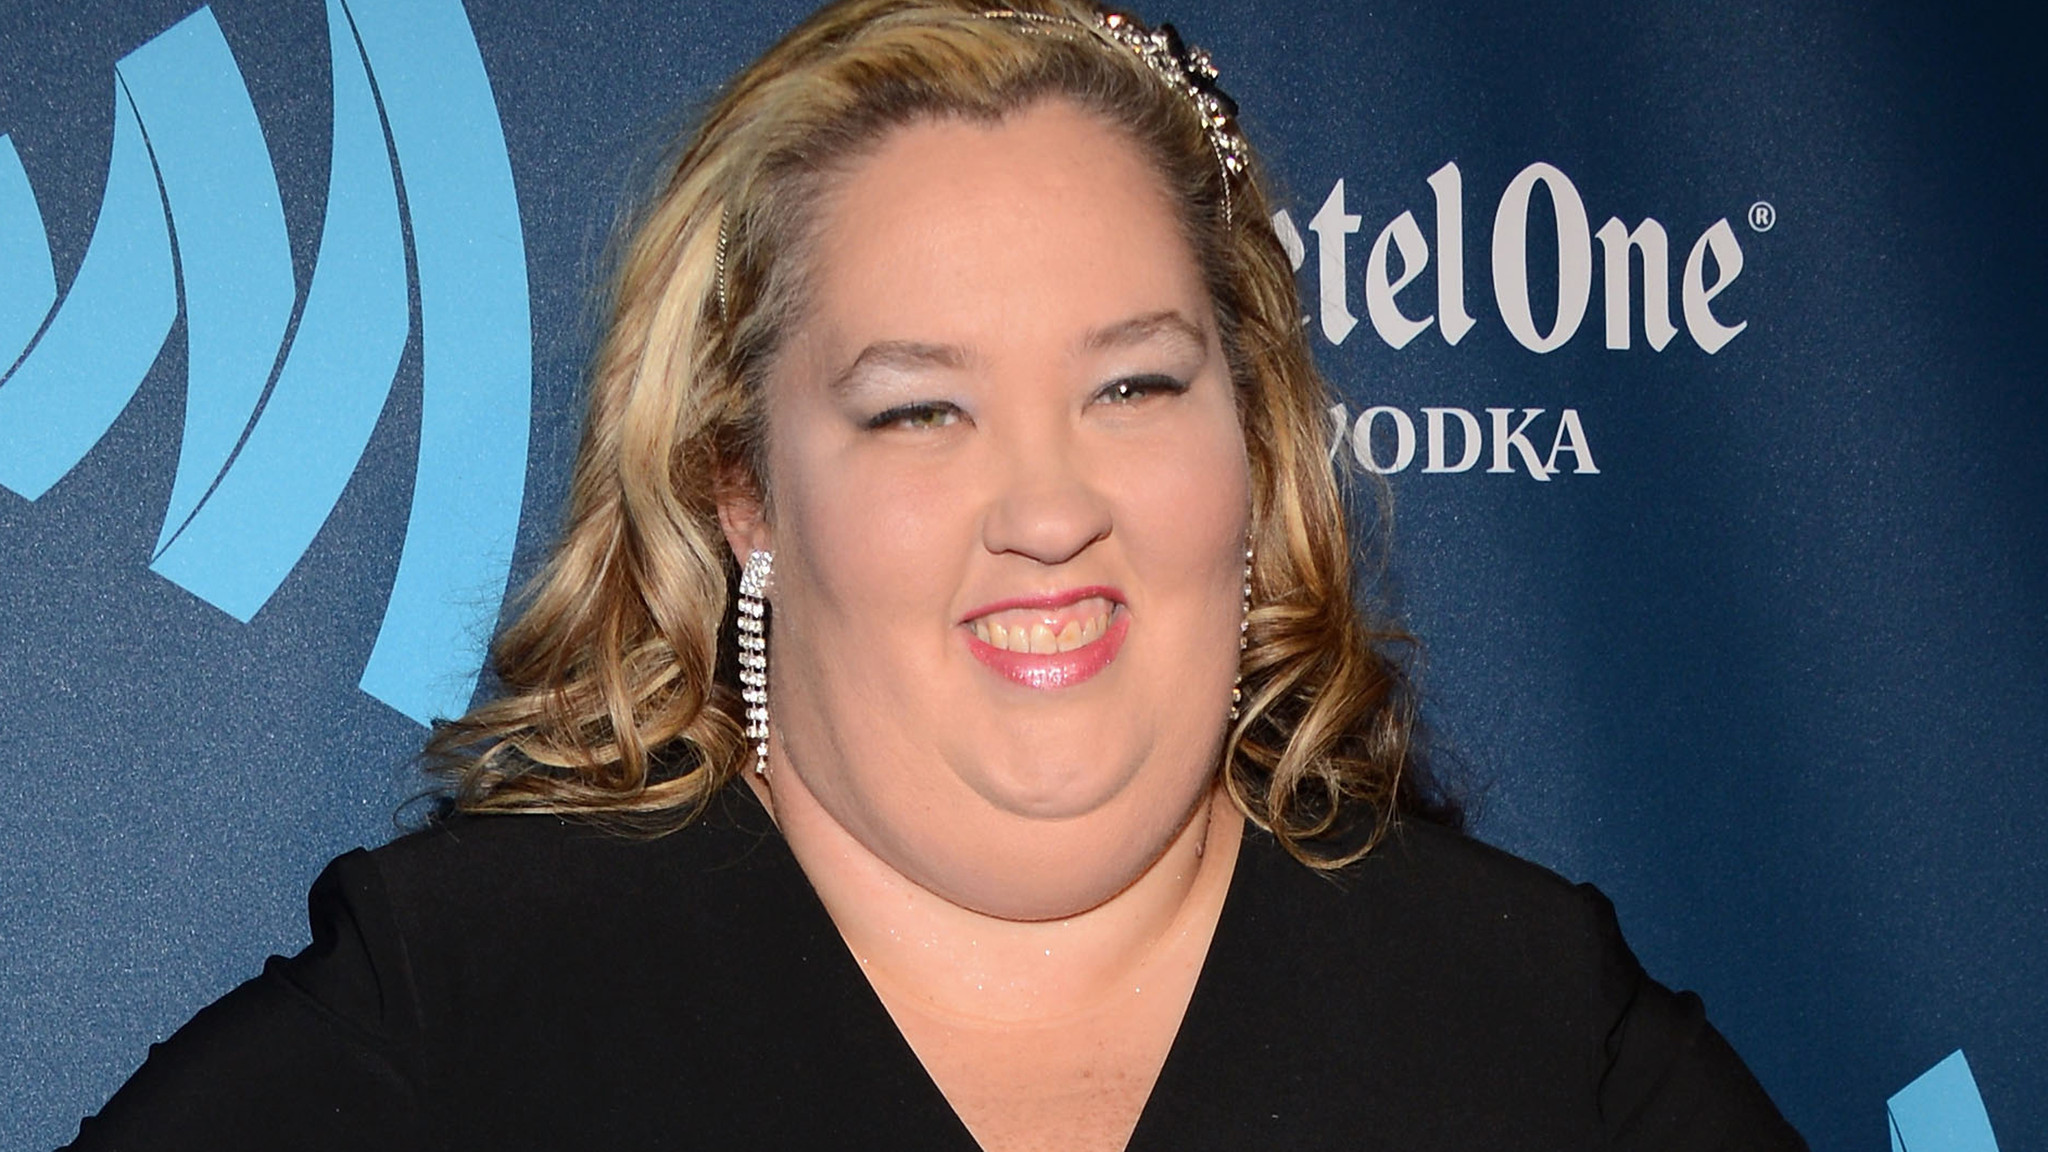 Mama June of 'Here Comes Honey Boo Boo' reportedly dating sex offender - LA Times